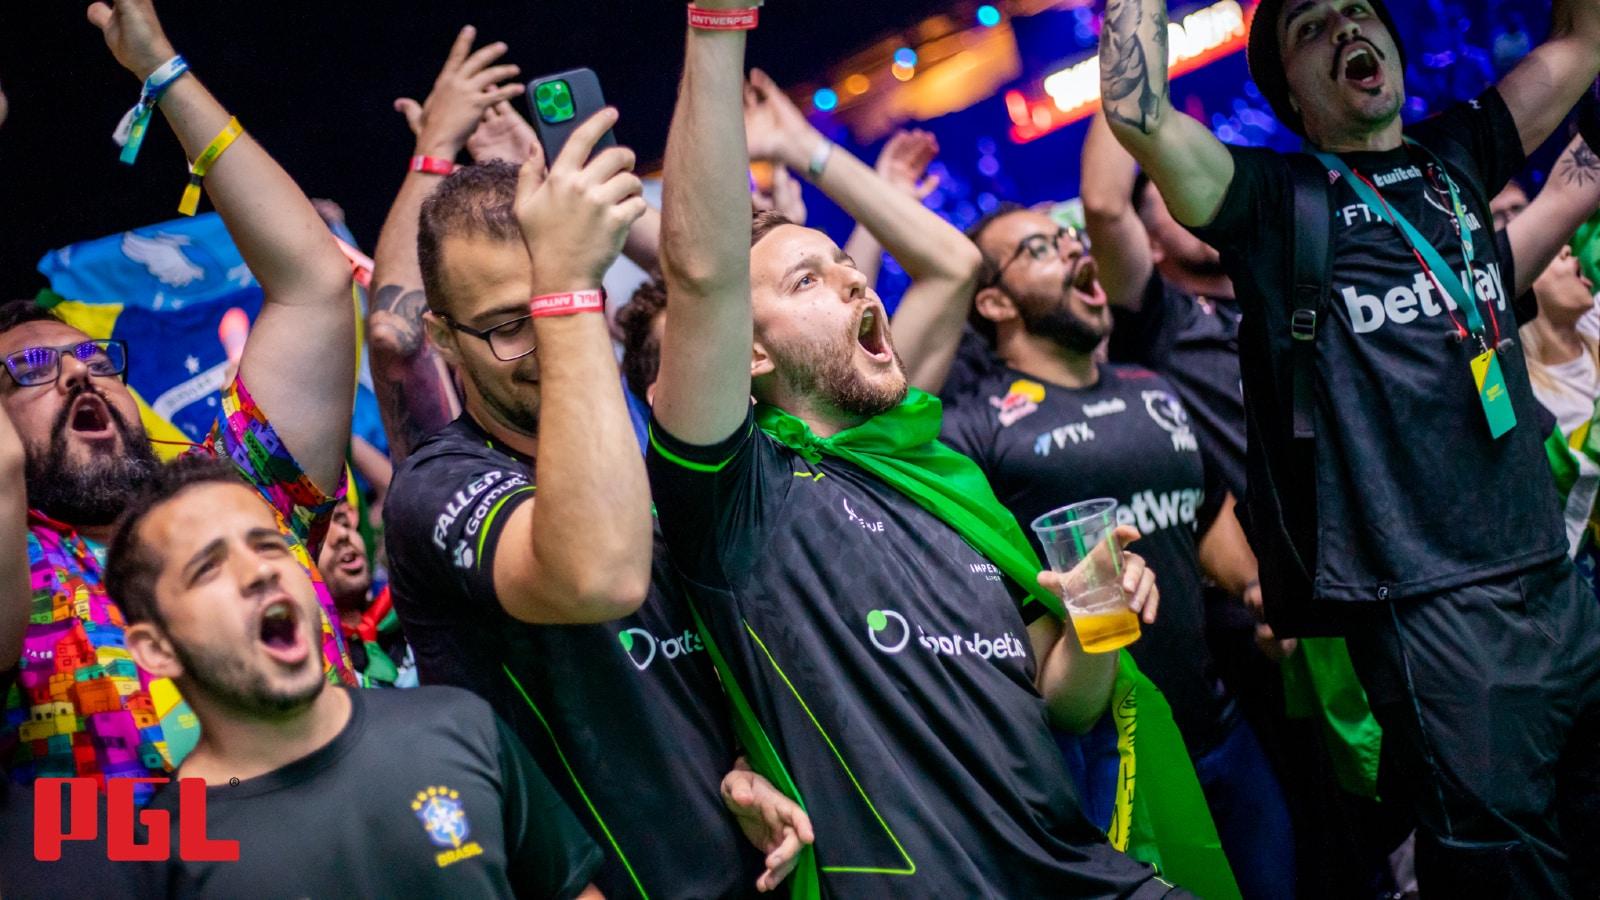 Brazilian fans cheer on their team at the PGL Major